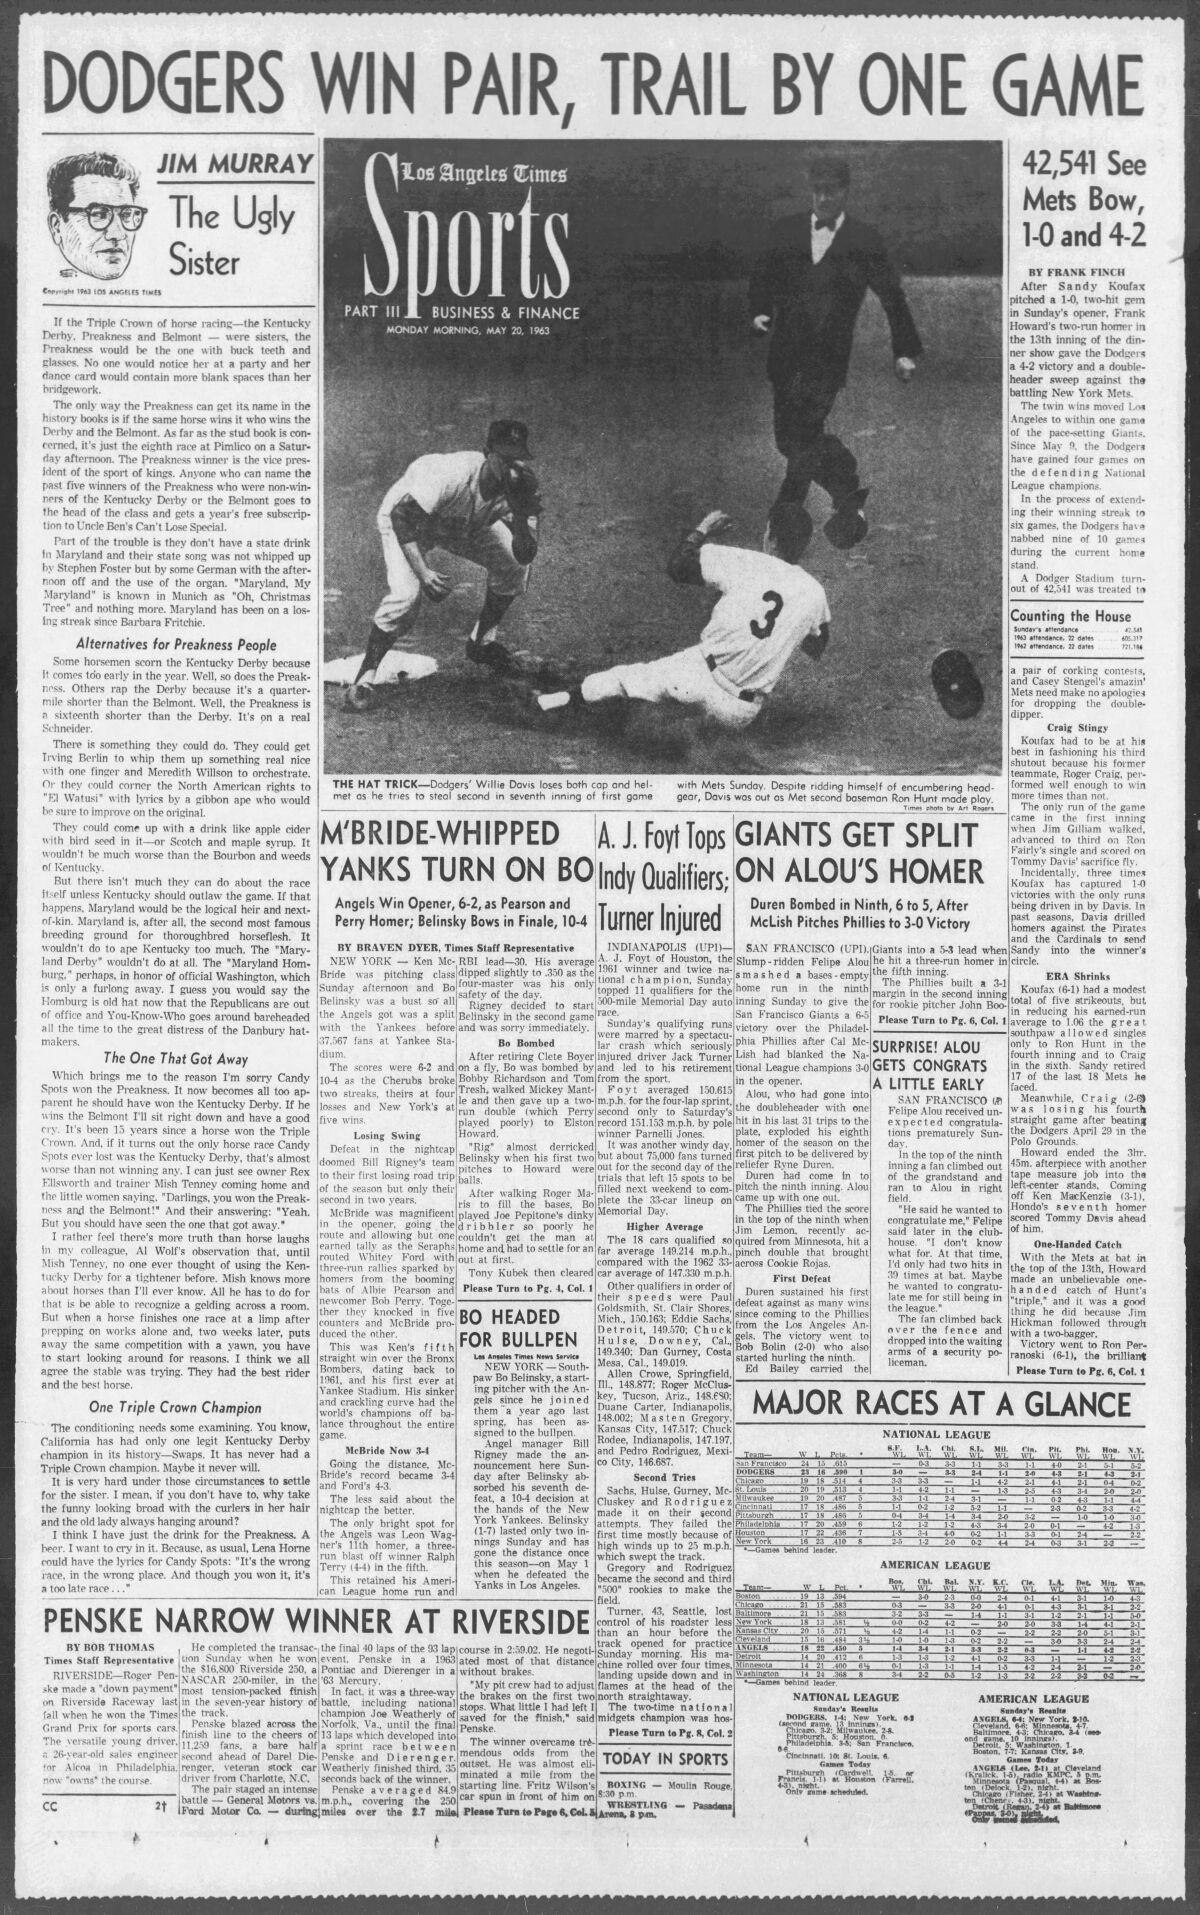 The front page of the Los Angeles Times Sports section on May 20, 1963.